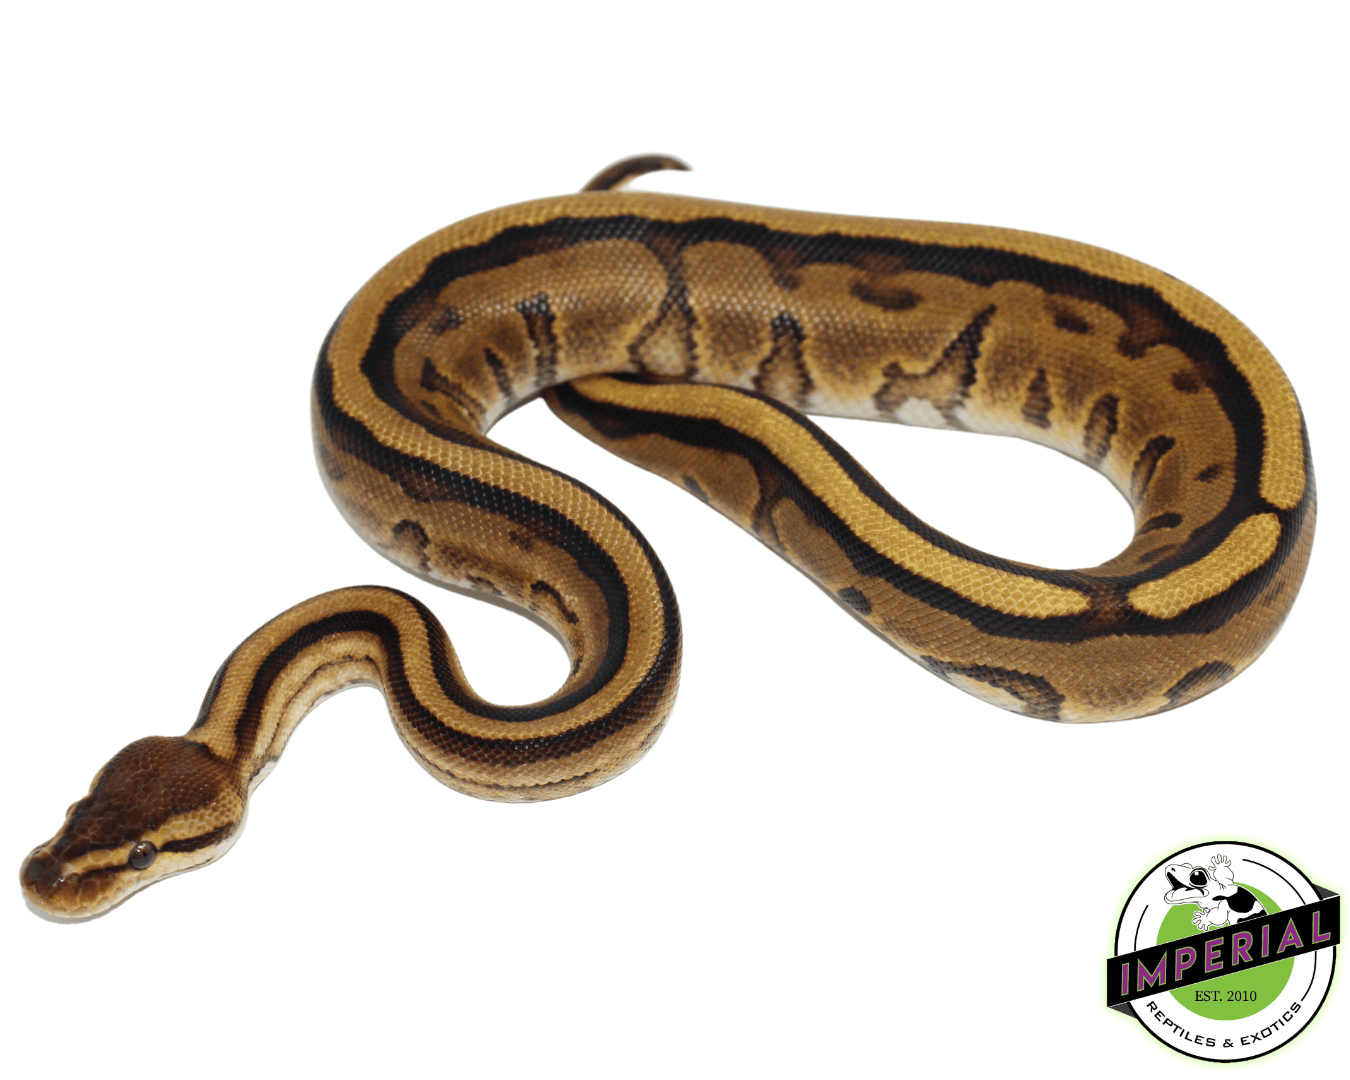 Genetic Stripe Yellowbelly ball python for sale, buy reptiles online